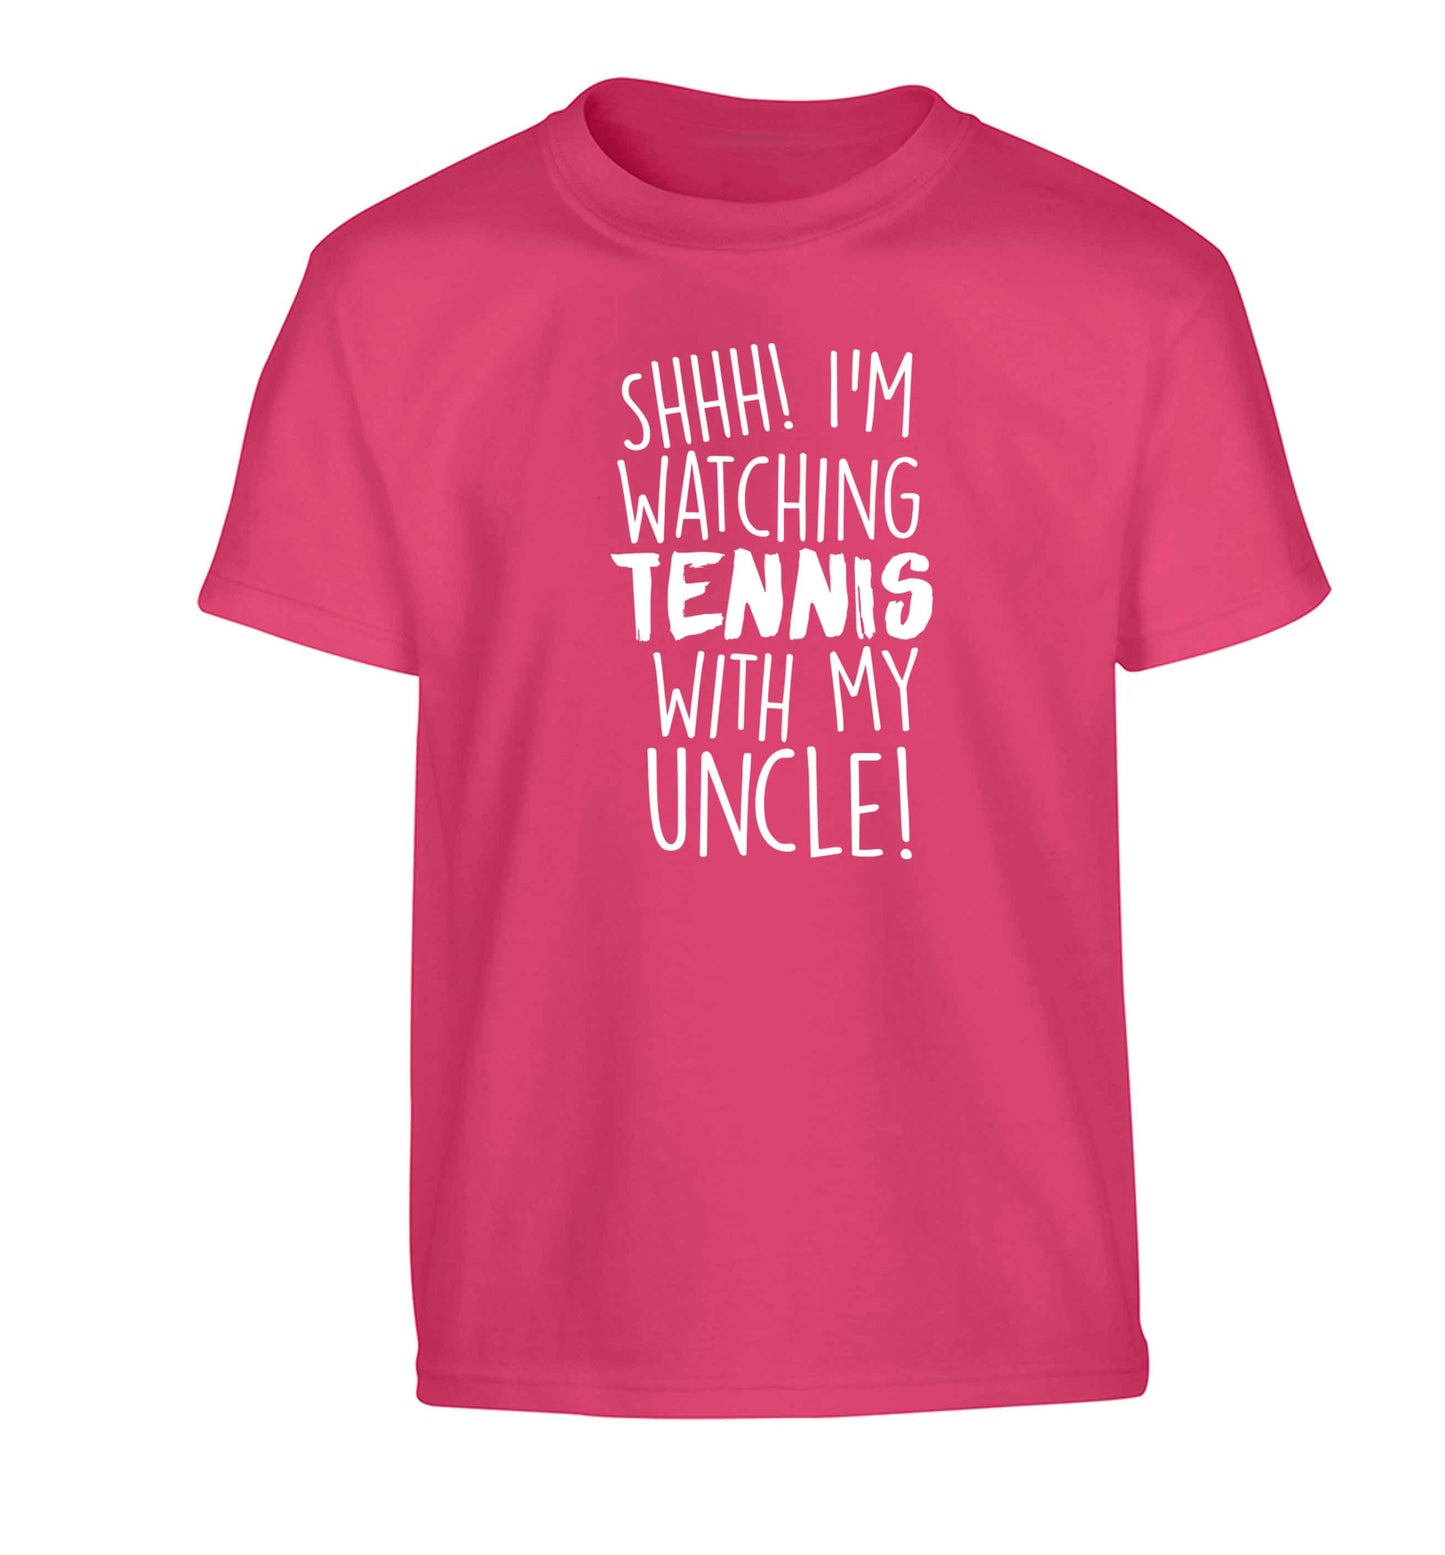 Shh! I'm watching tennis with my uncle! Children's pink Tshirt 12-13 Years